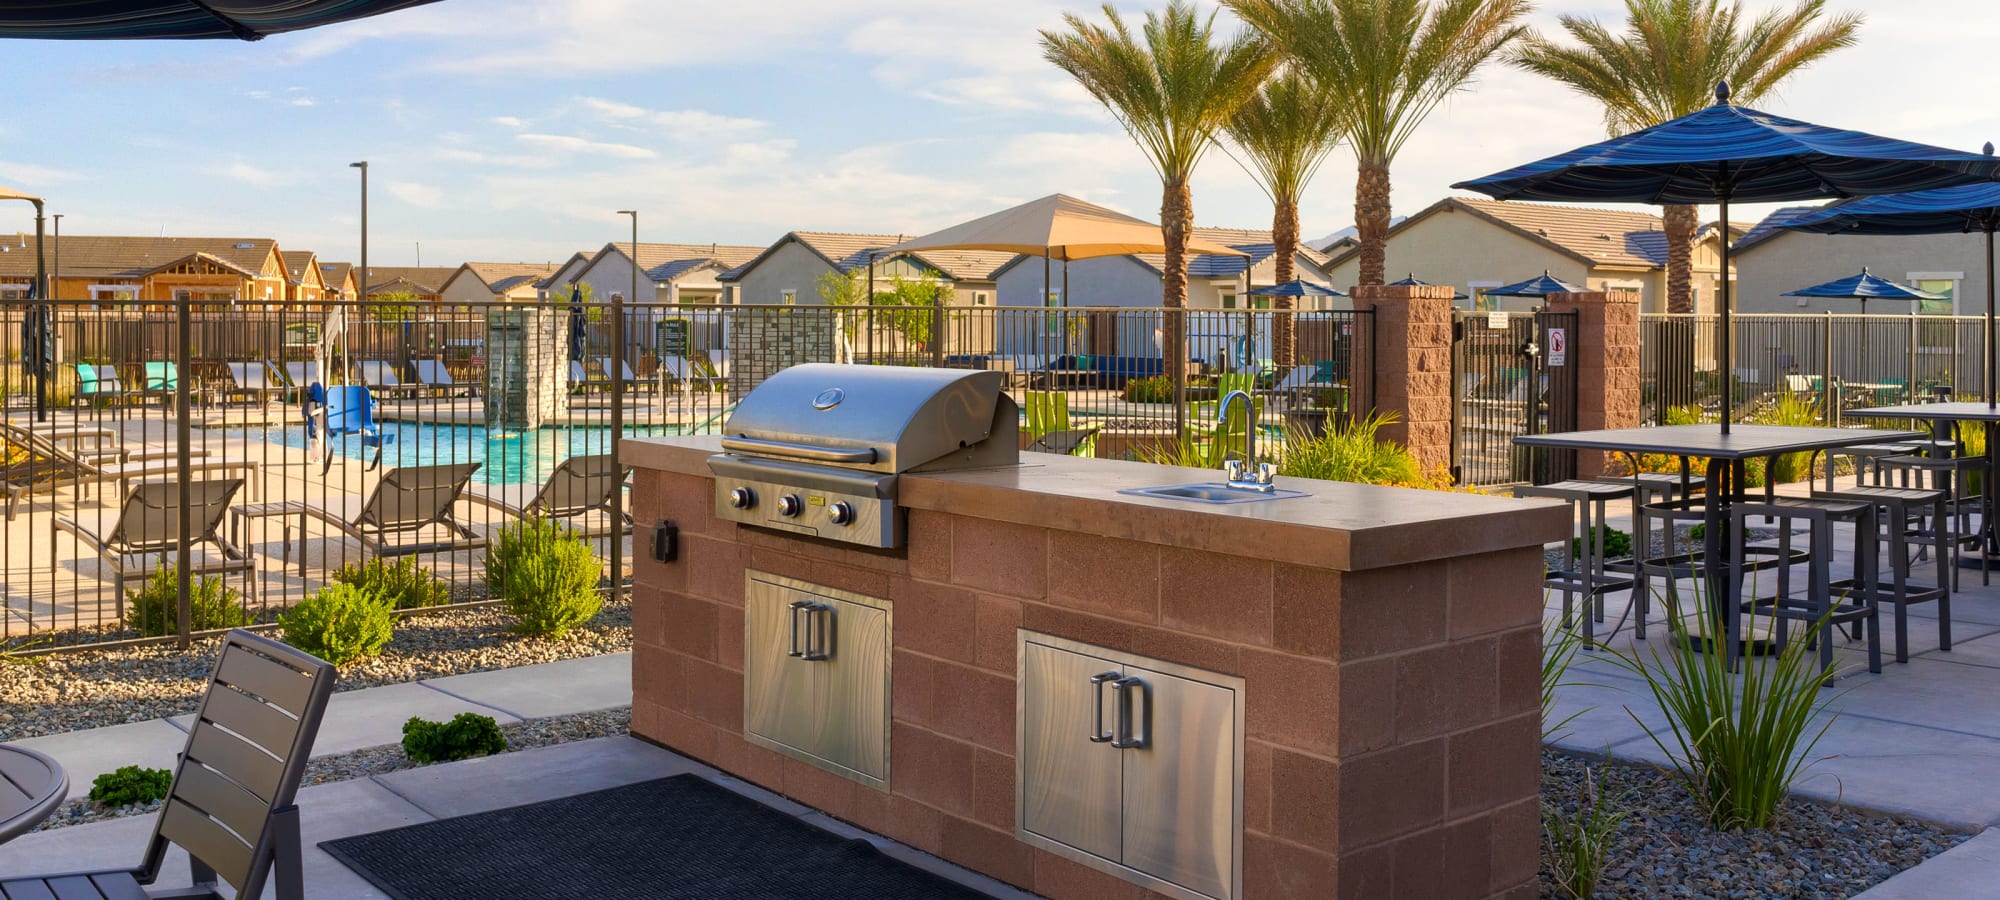 Poolside grilling station at Estia Windrose in Litchfield Park, Arizona